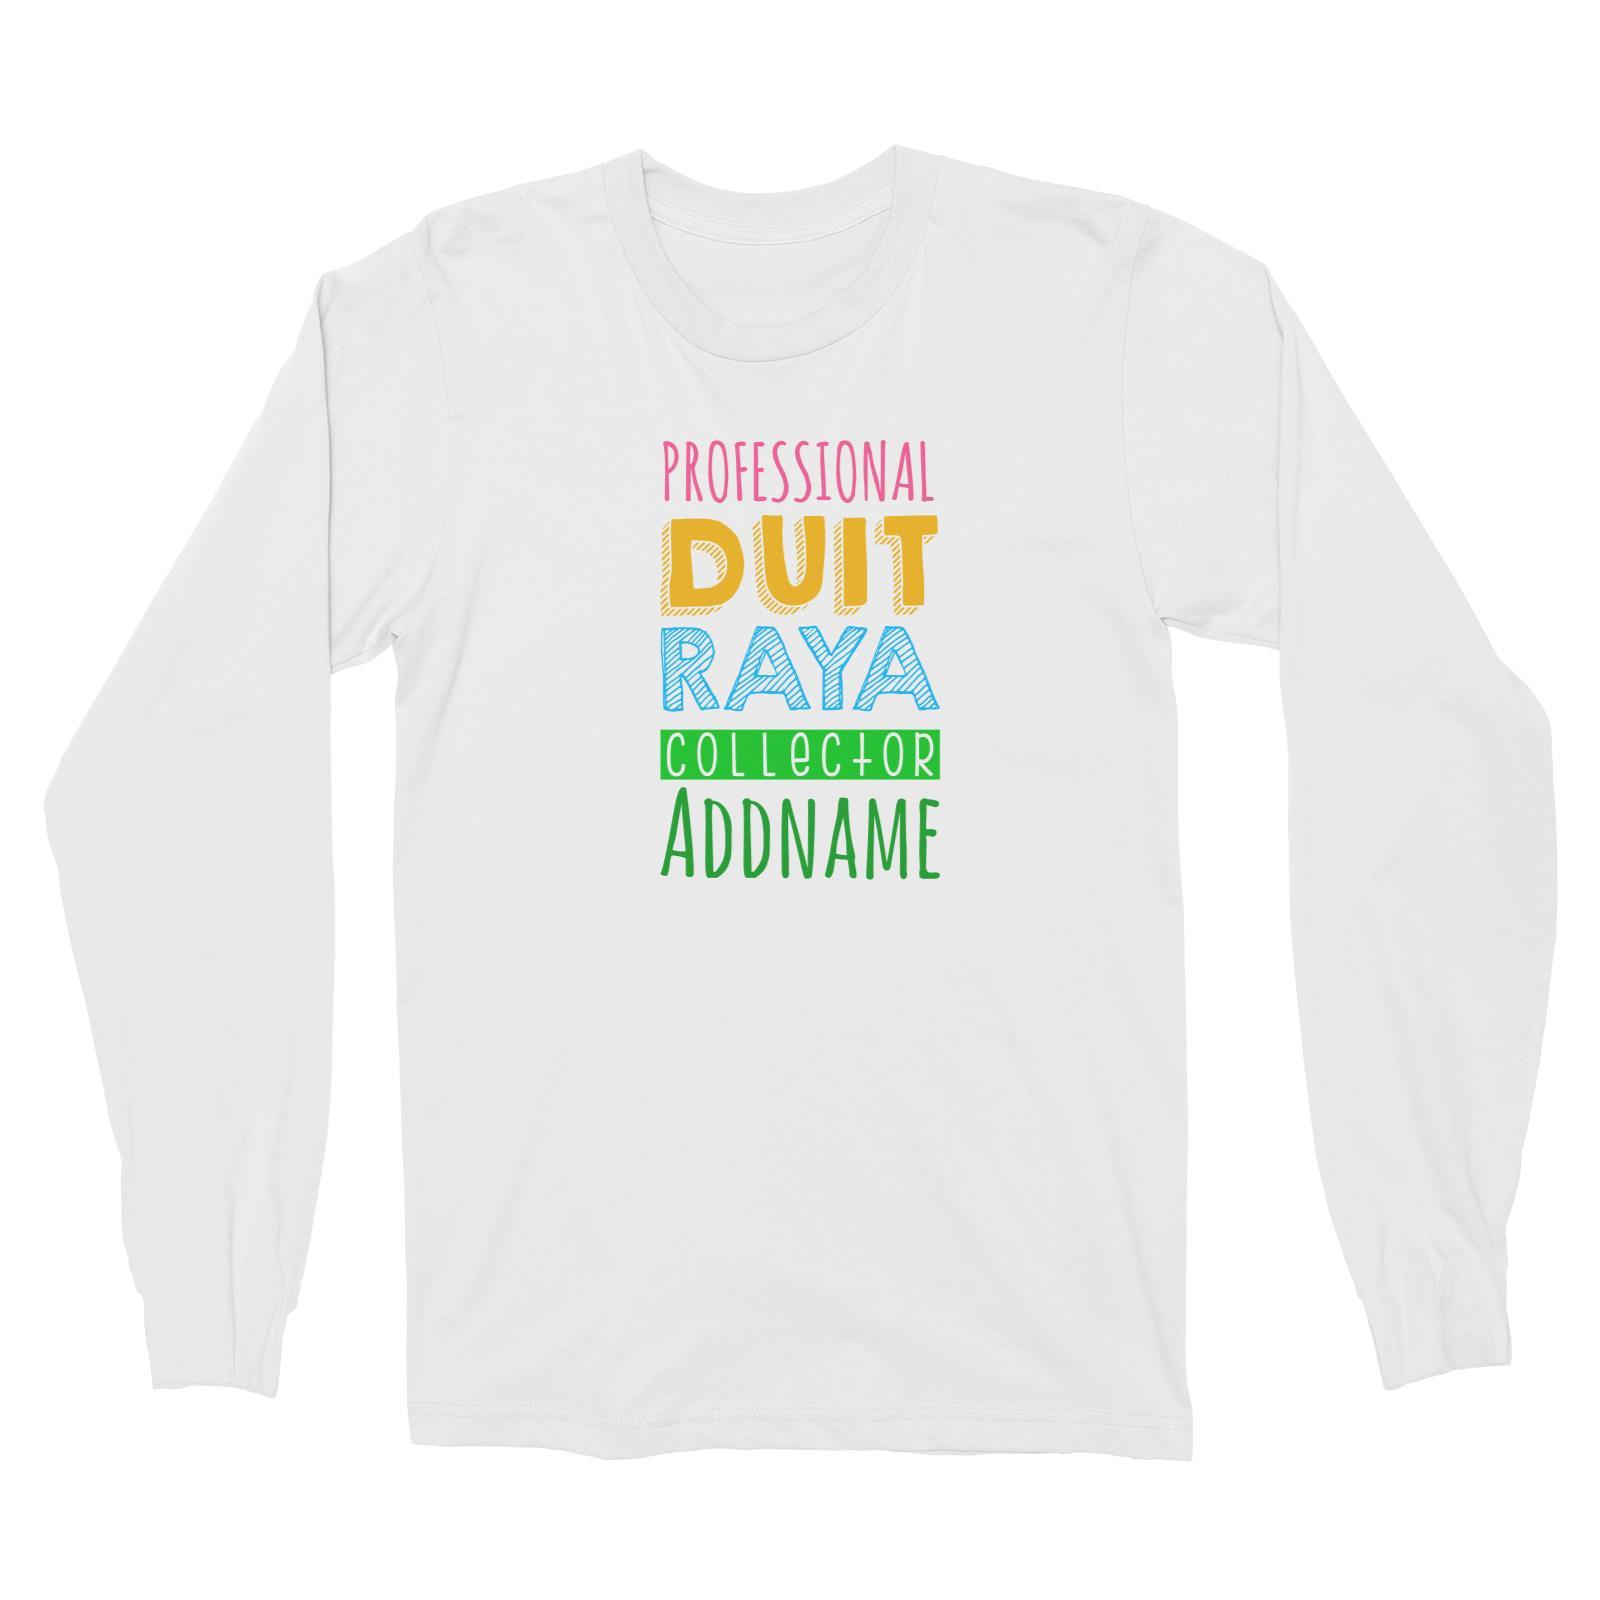 Professional Duit Raya Collector Long Sleeve Unisex T-Shirt  Personalizable Designs